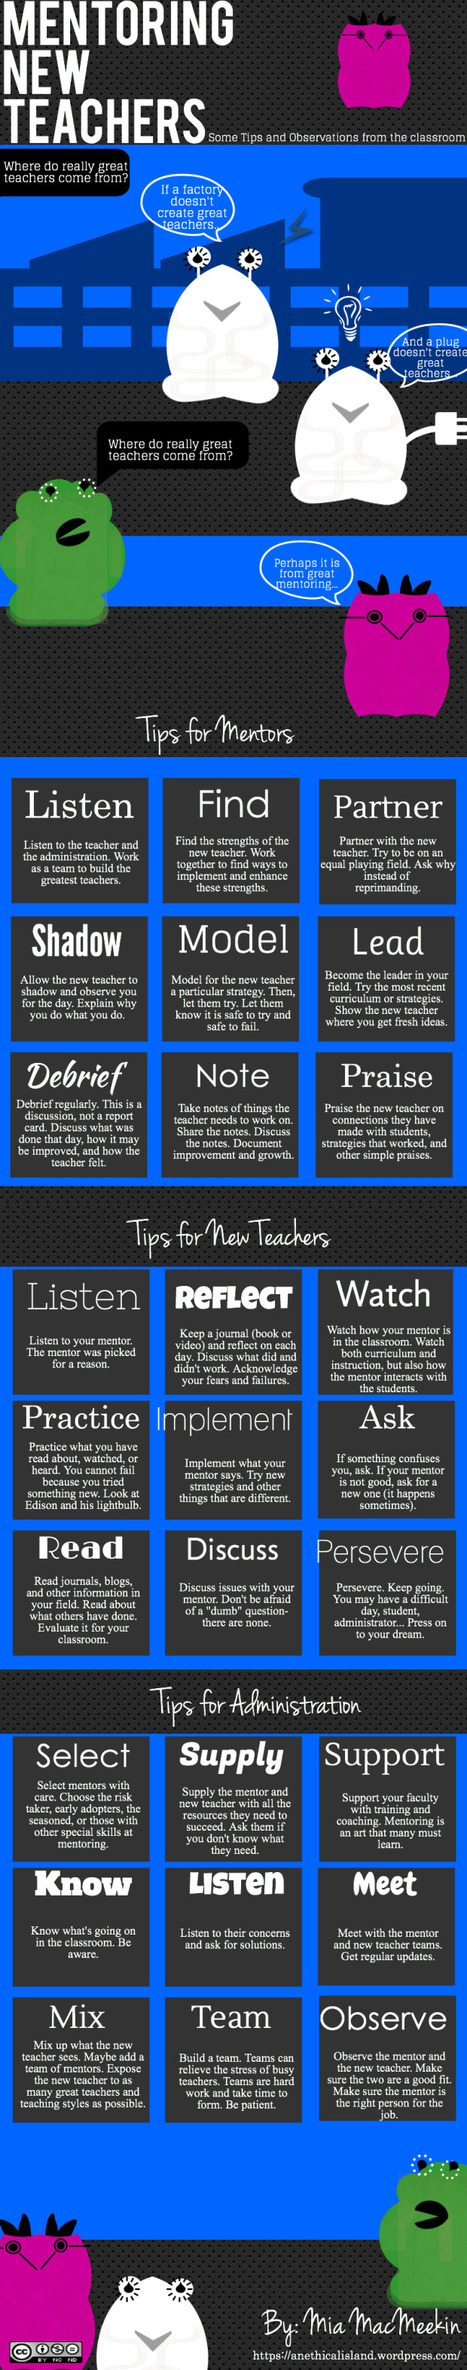 27 Tips For Mentoring New Teachers [Infographic] | 21st Century Learning and Teaching | Scoop.it